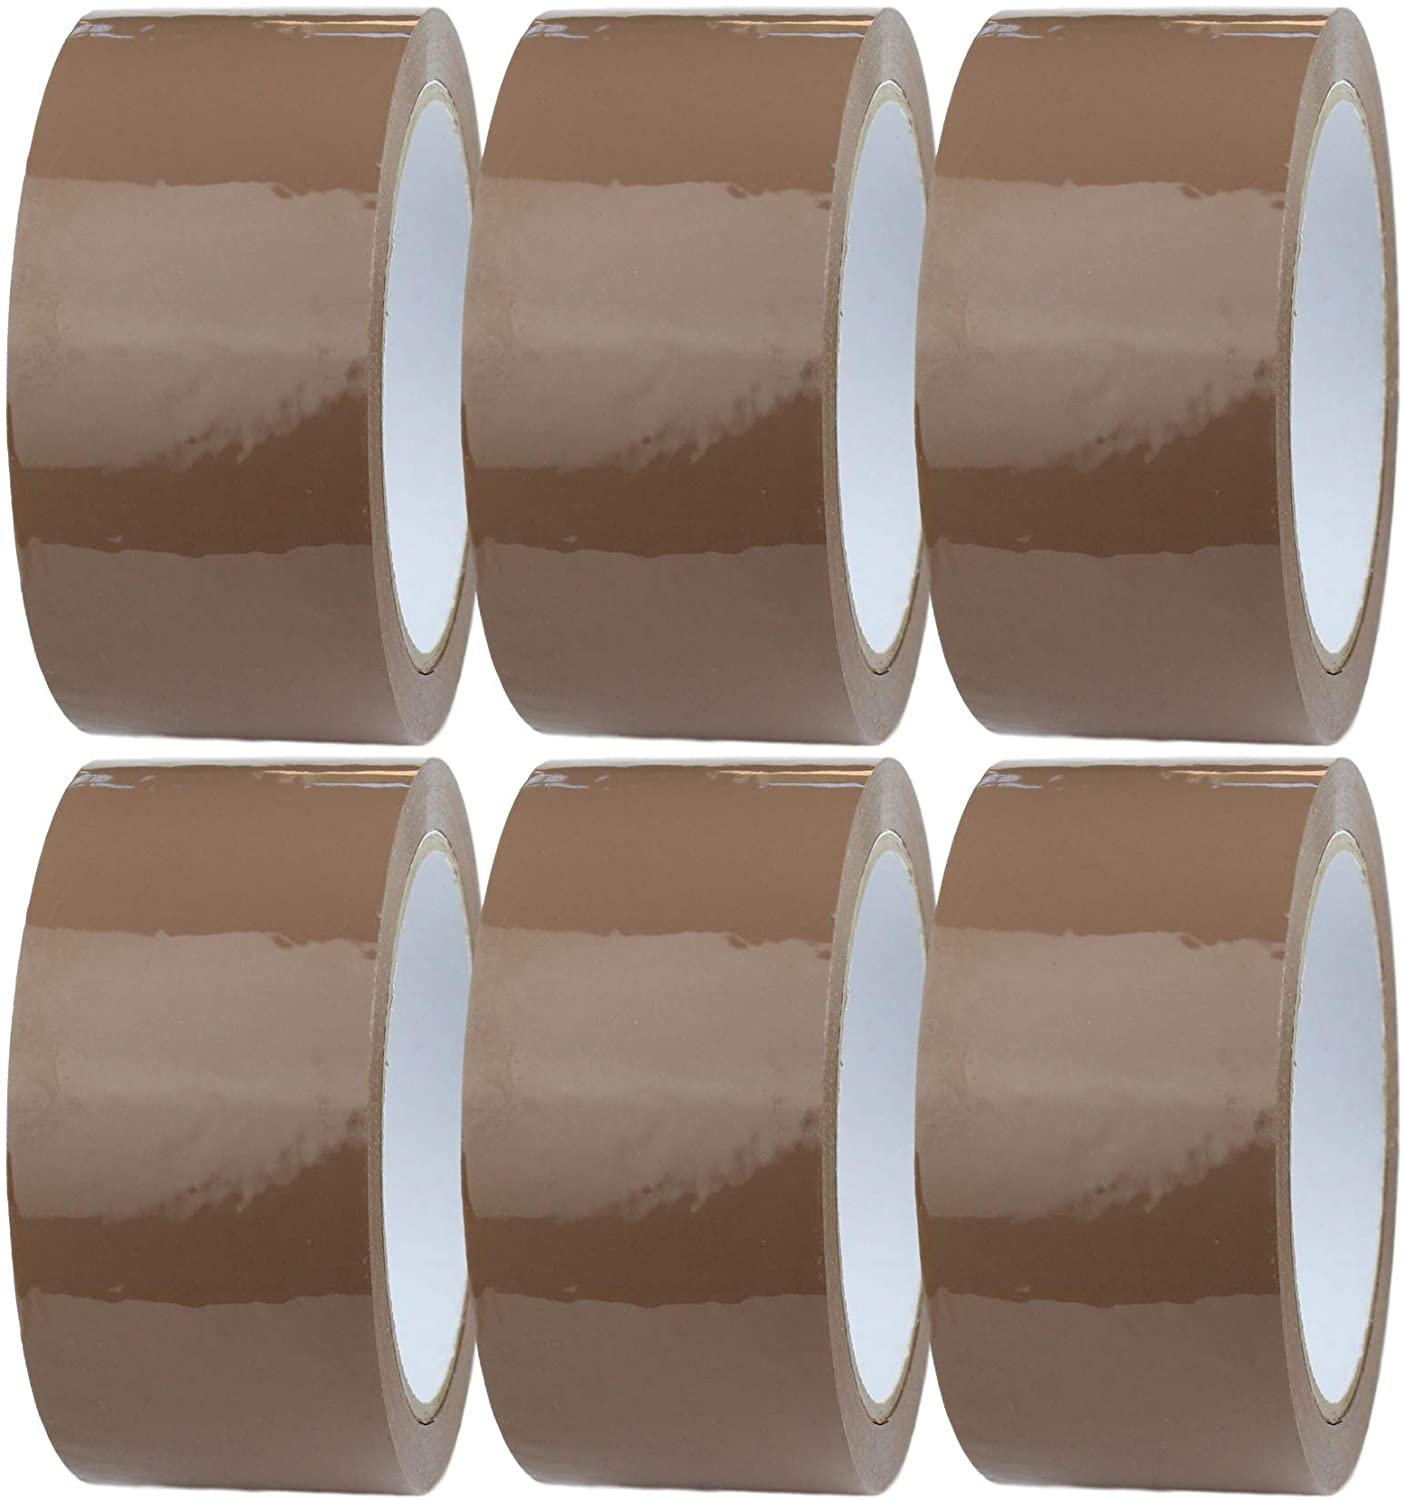 Brown packing tape